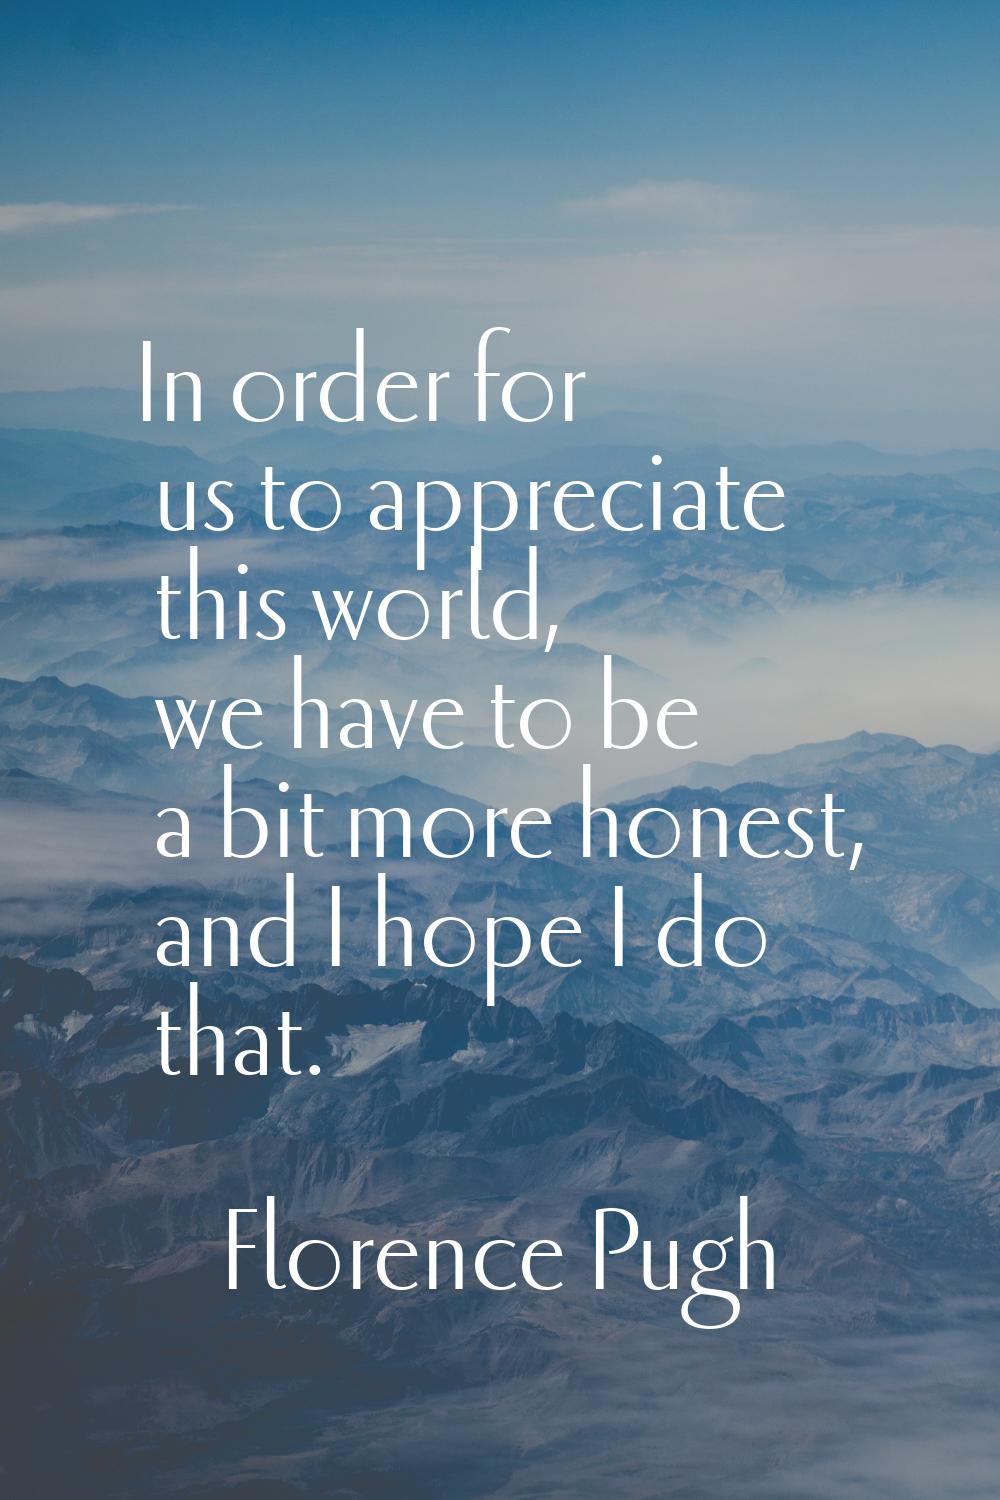 In order for us to appreciate this world, we have to be a bit more honest, and I hope I do that.